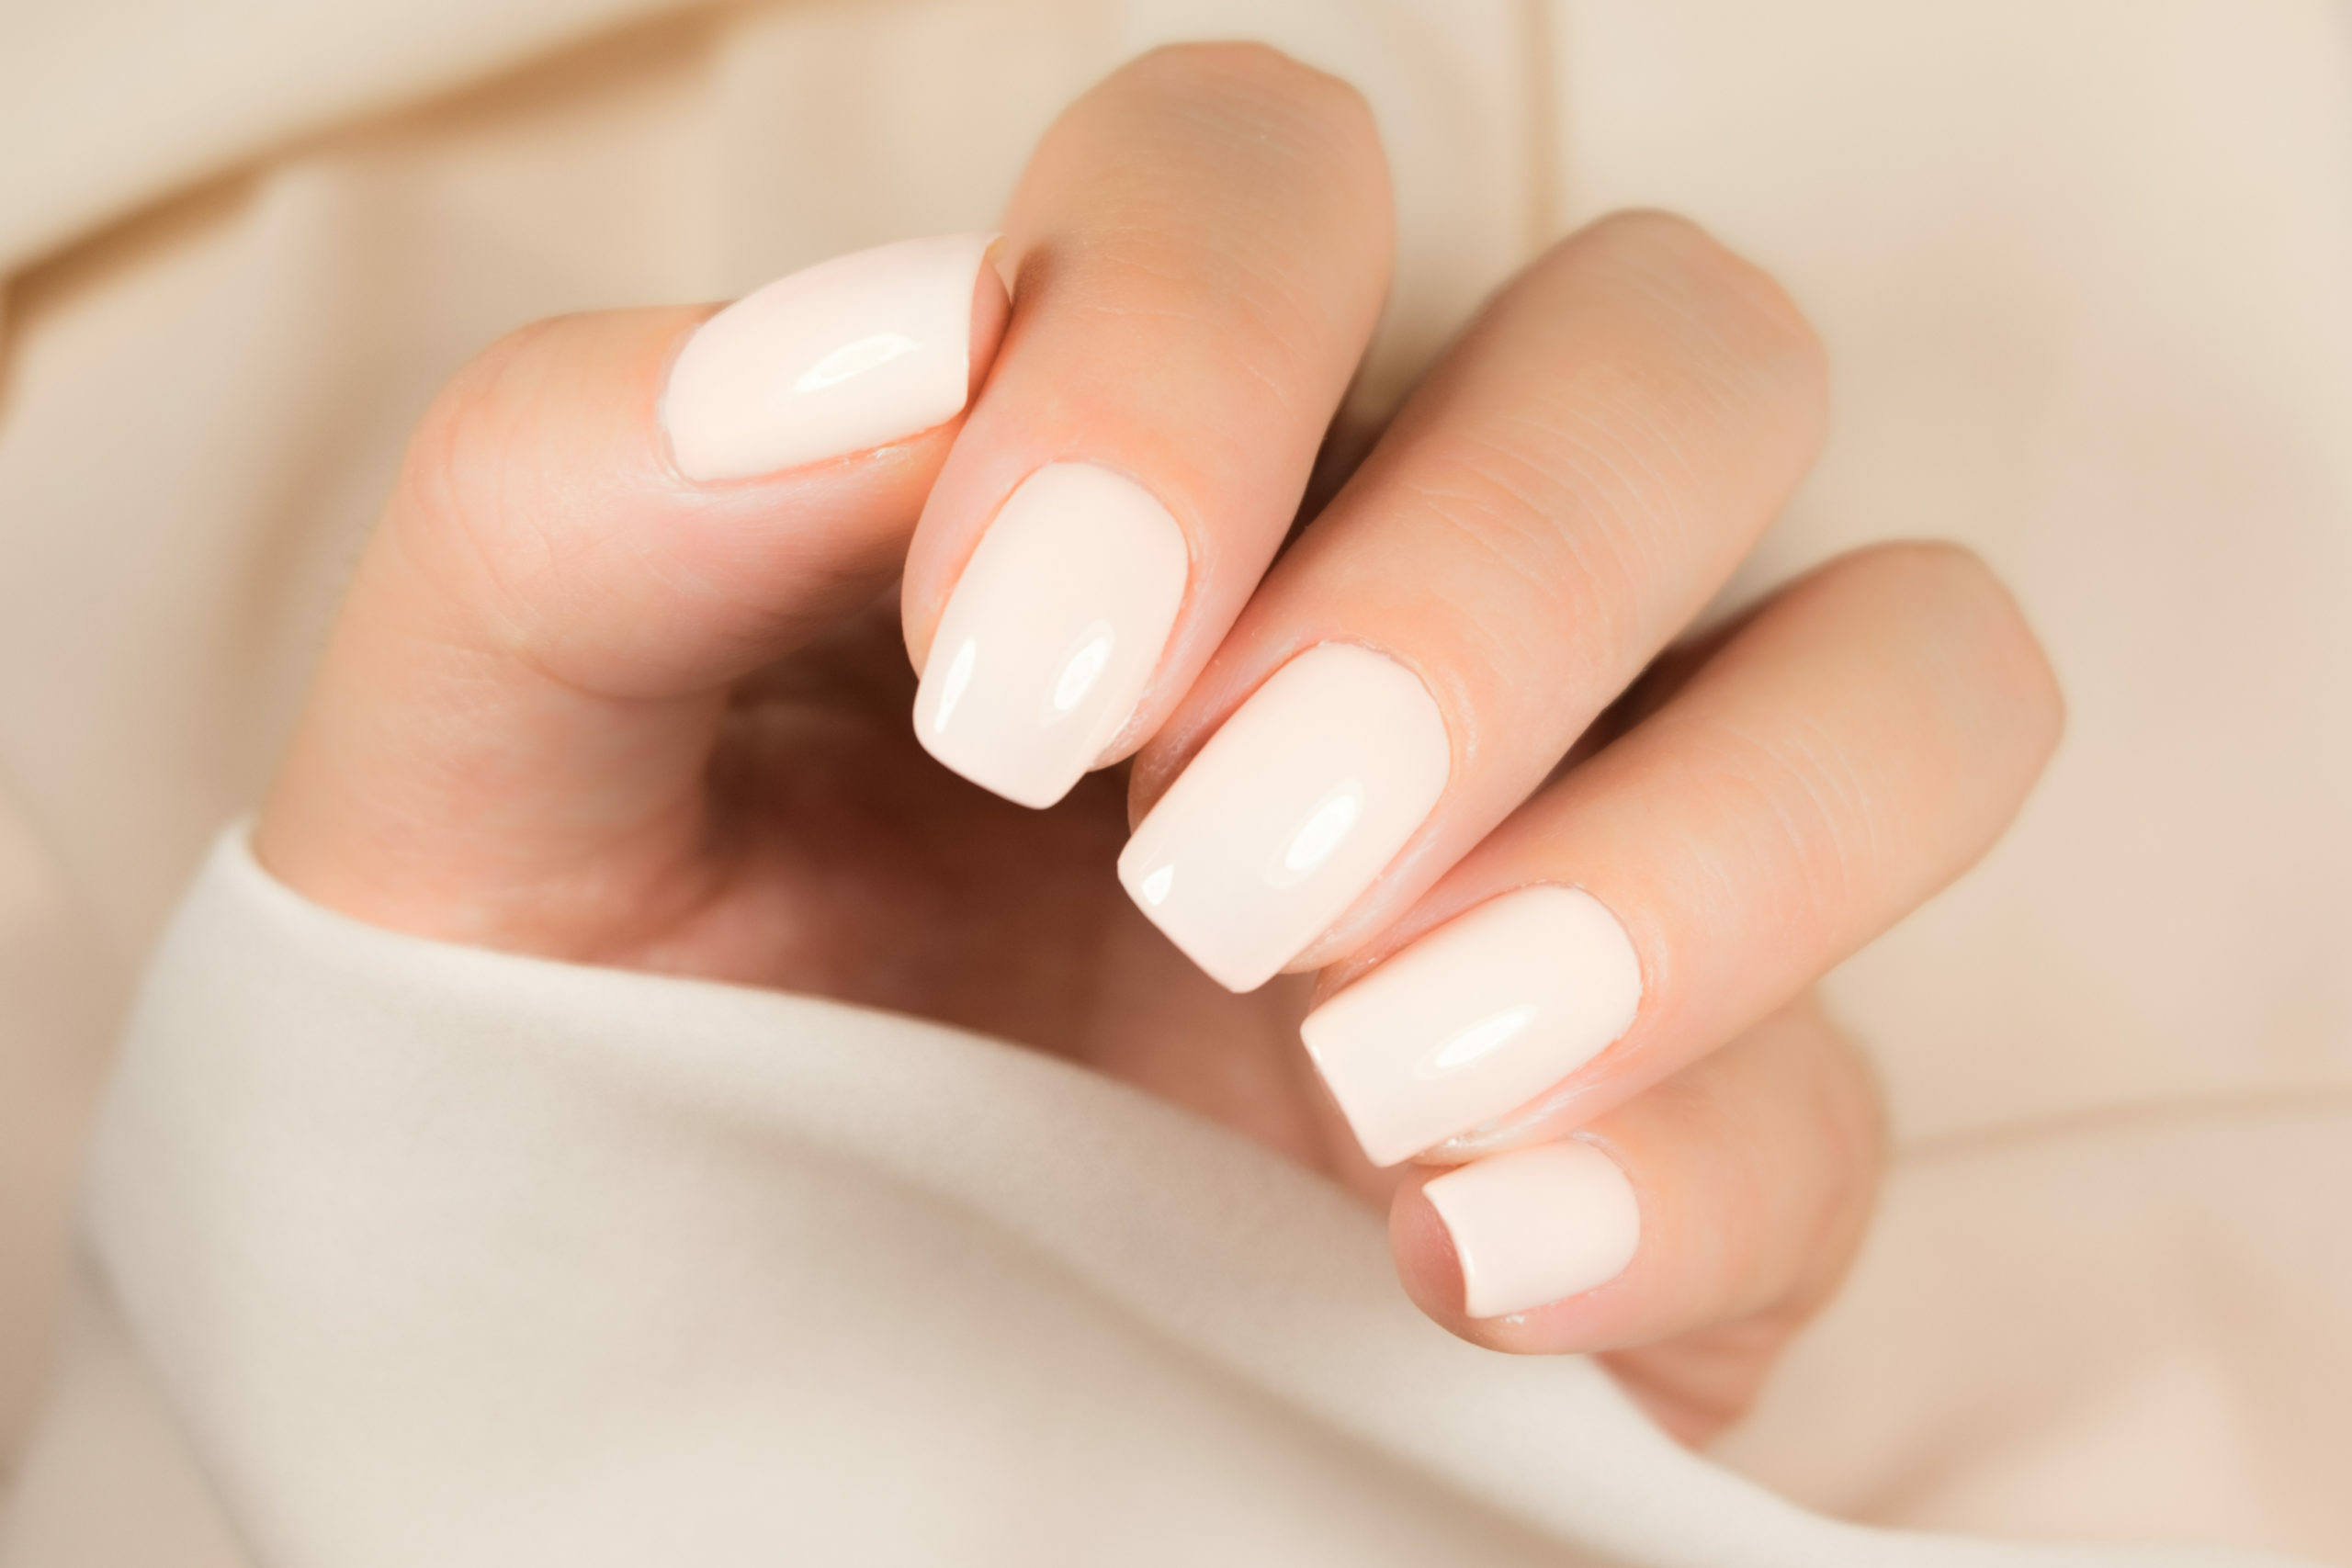 DaySmart  Salon Owner's Guide to Natural Acrylic Nails